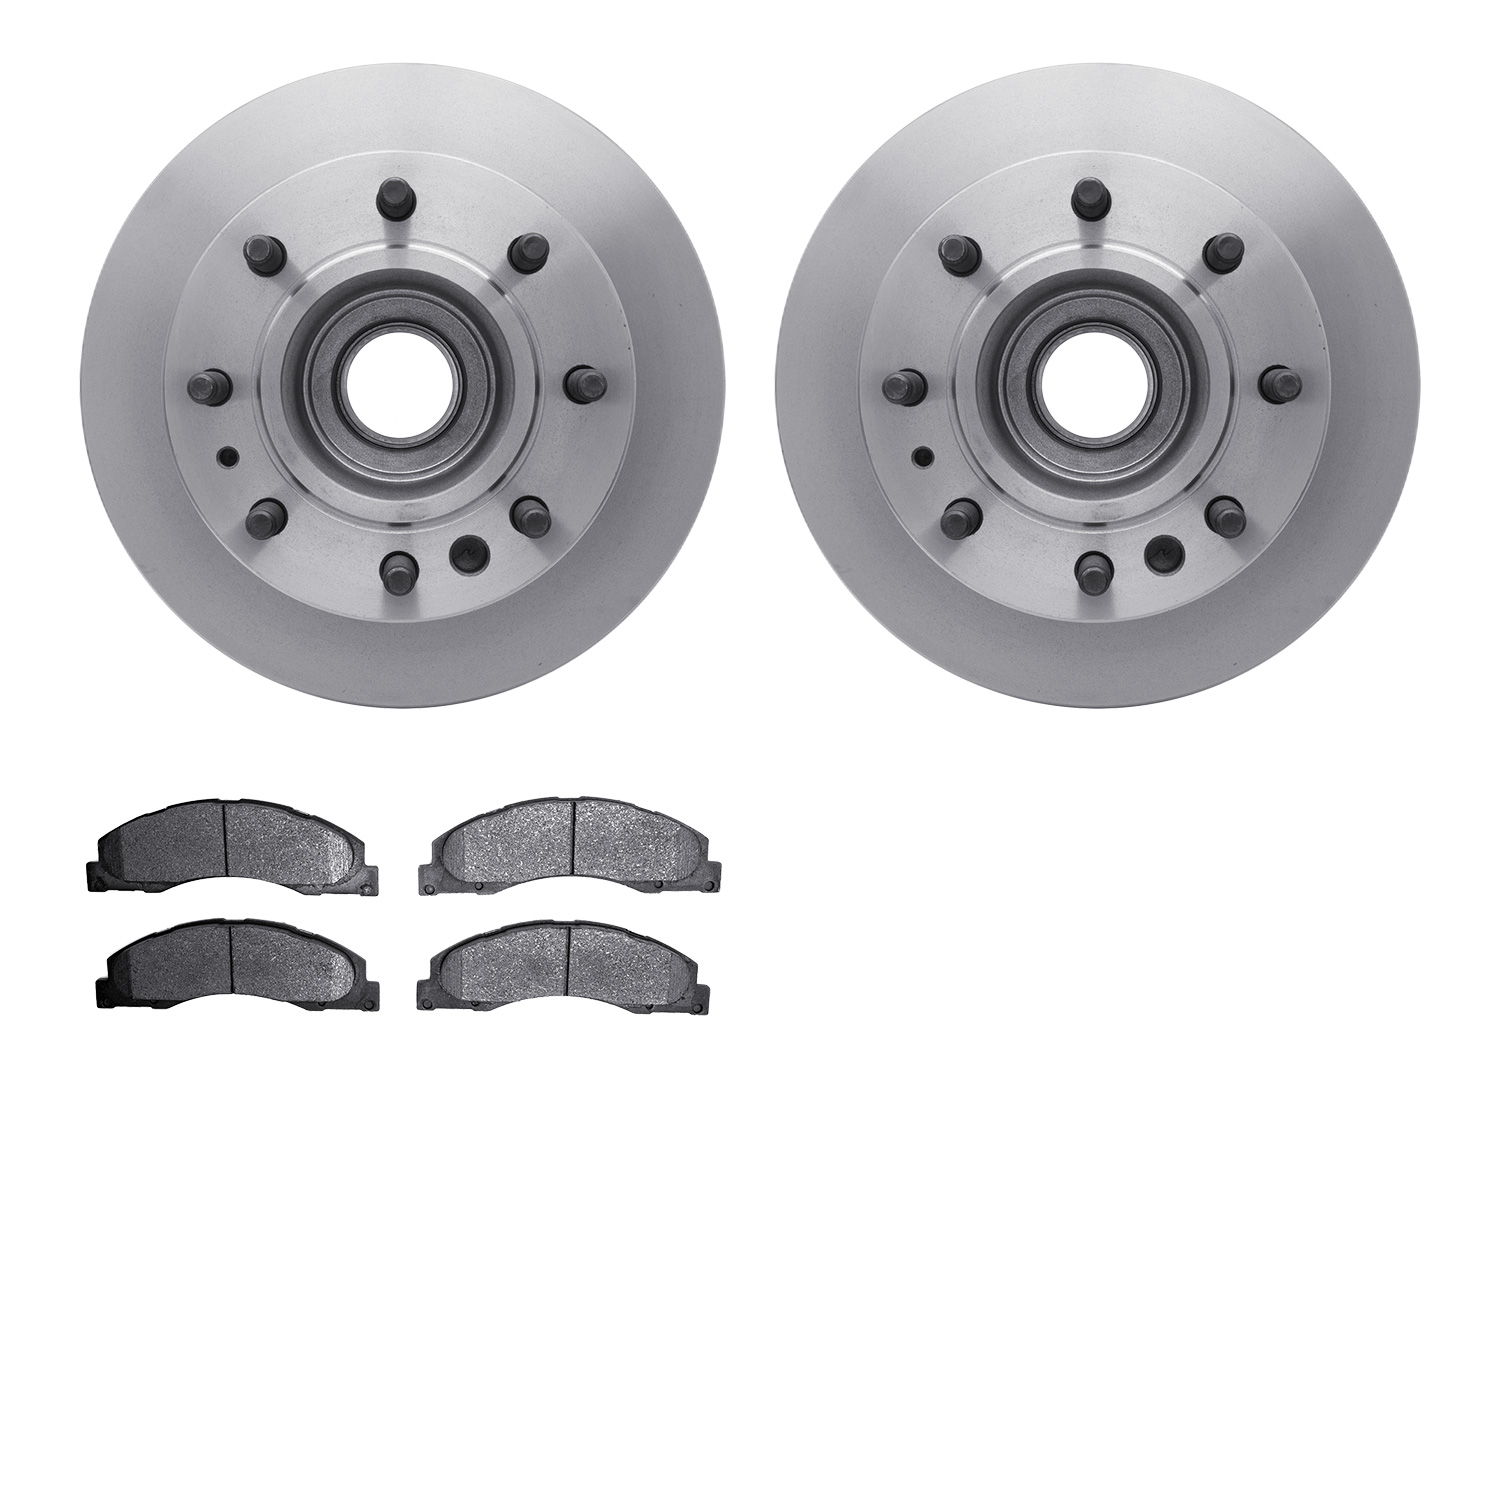 6502-99642 Brake Rotors w/5000 Advanced Brake Pads Kit, Fits Select Ford/Lincoln/Mercury/Mazda, Position: Front